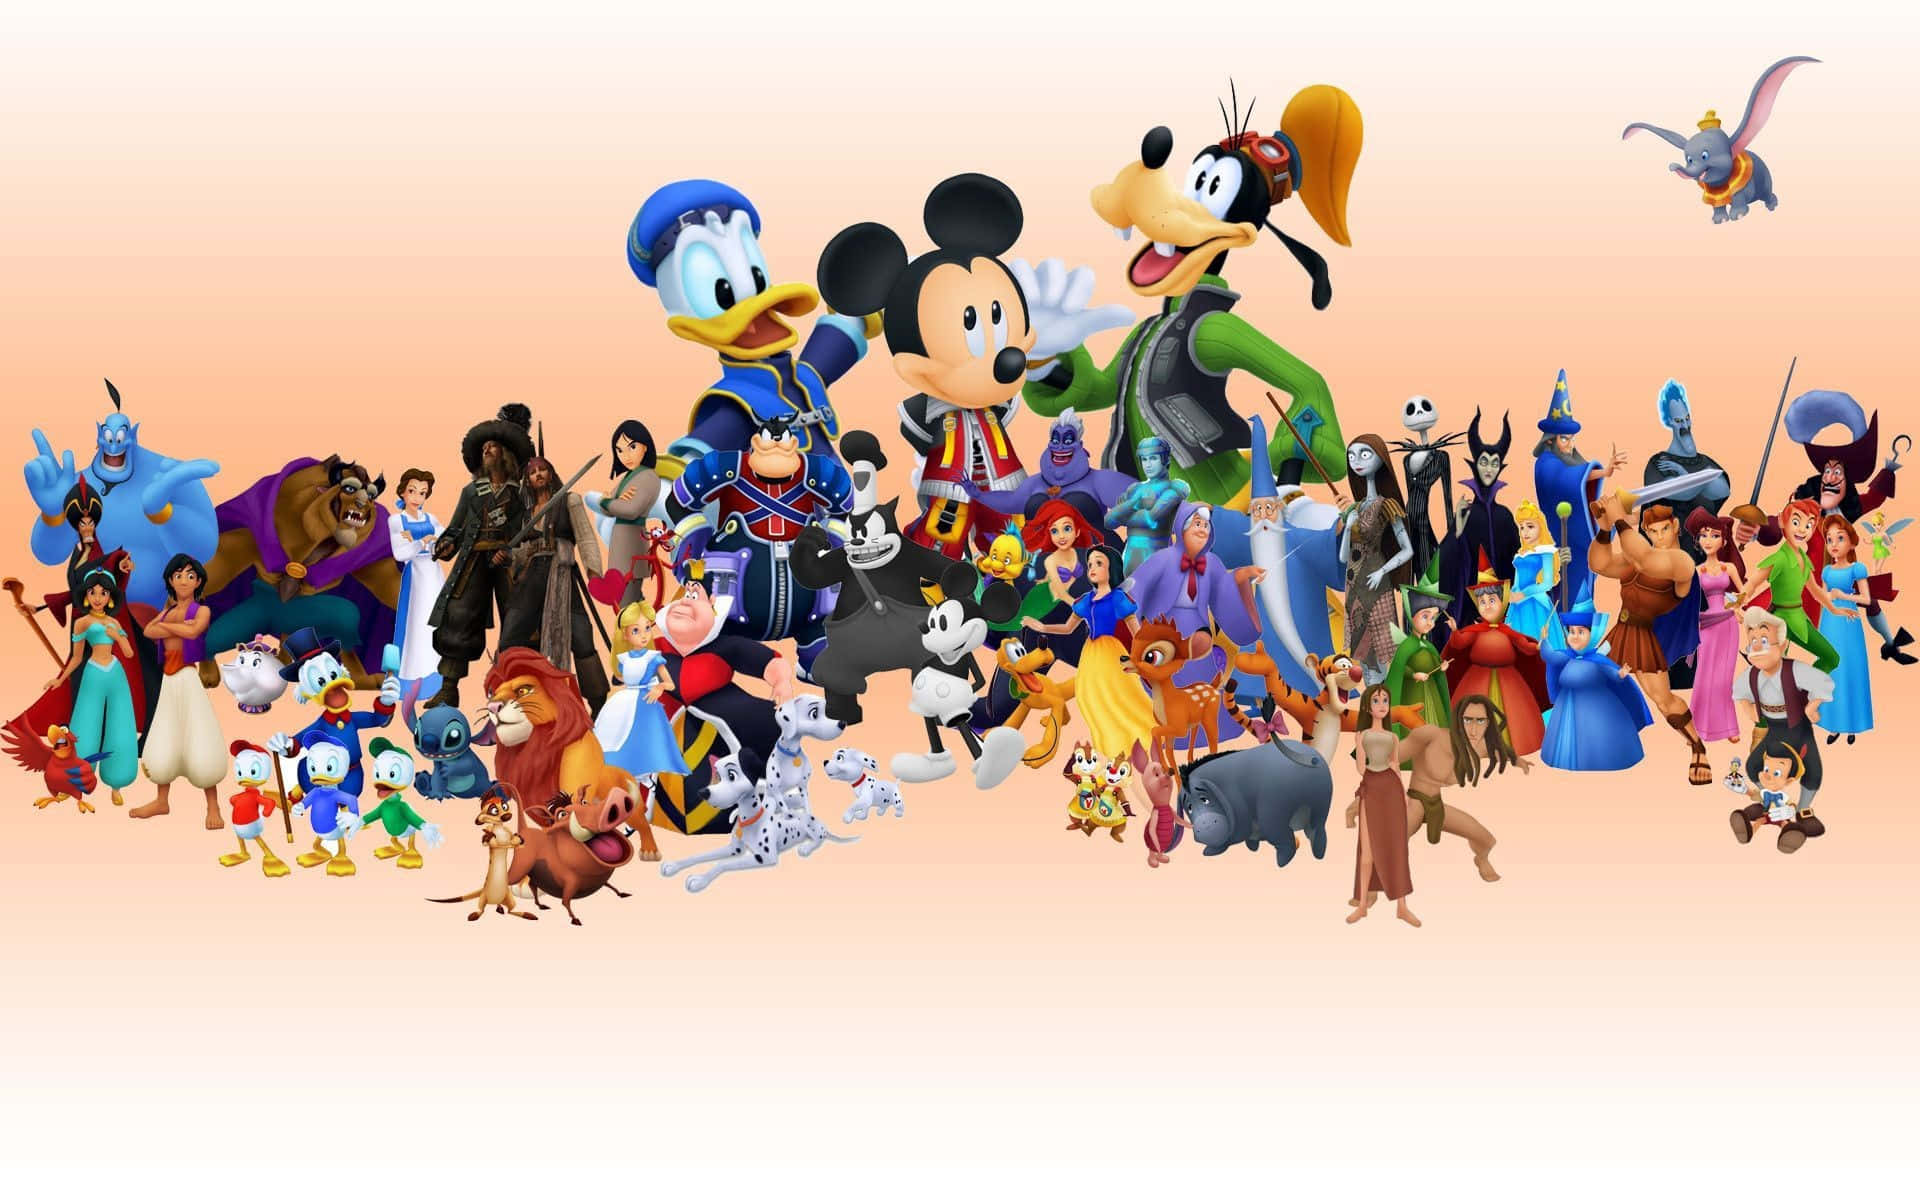 Download Disney Characters Grouped Together In A Group